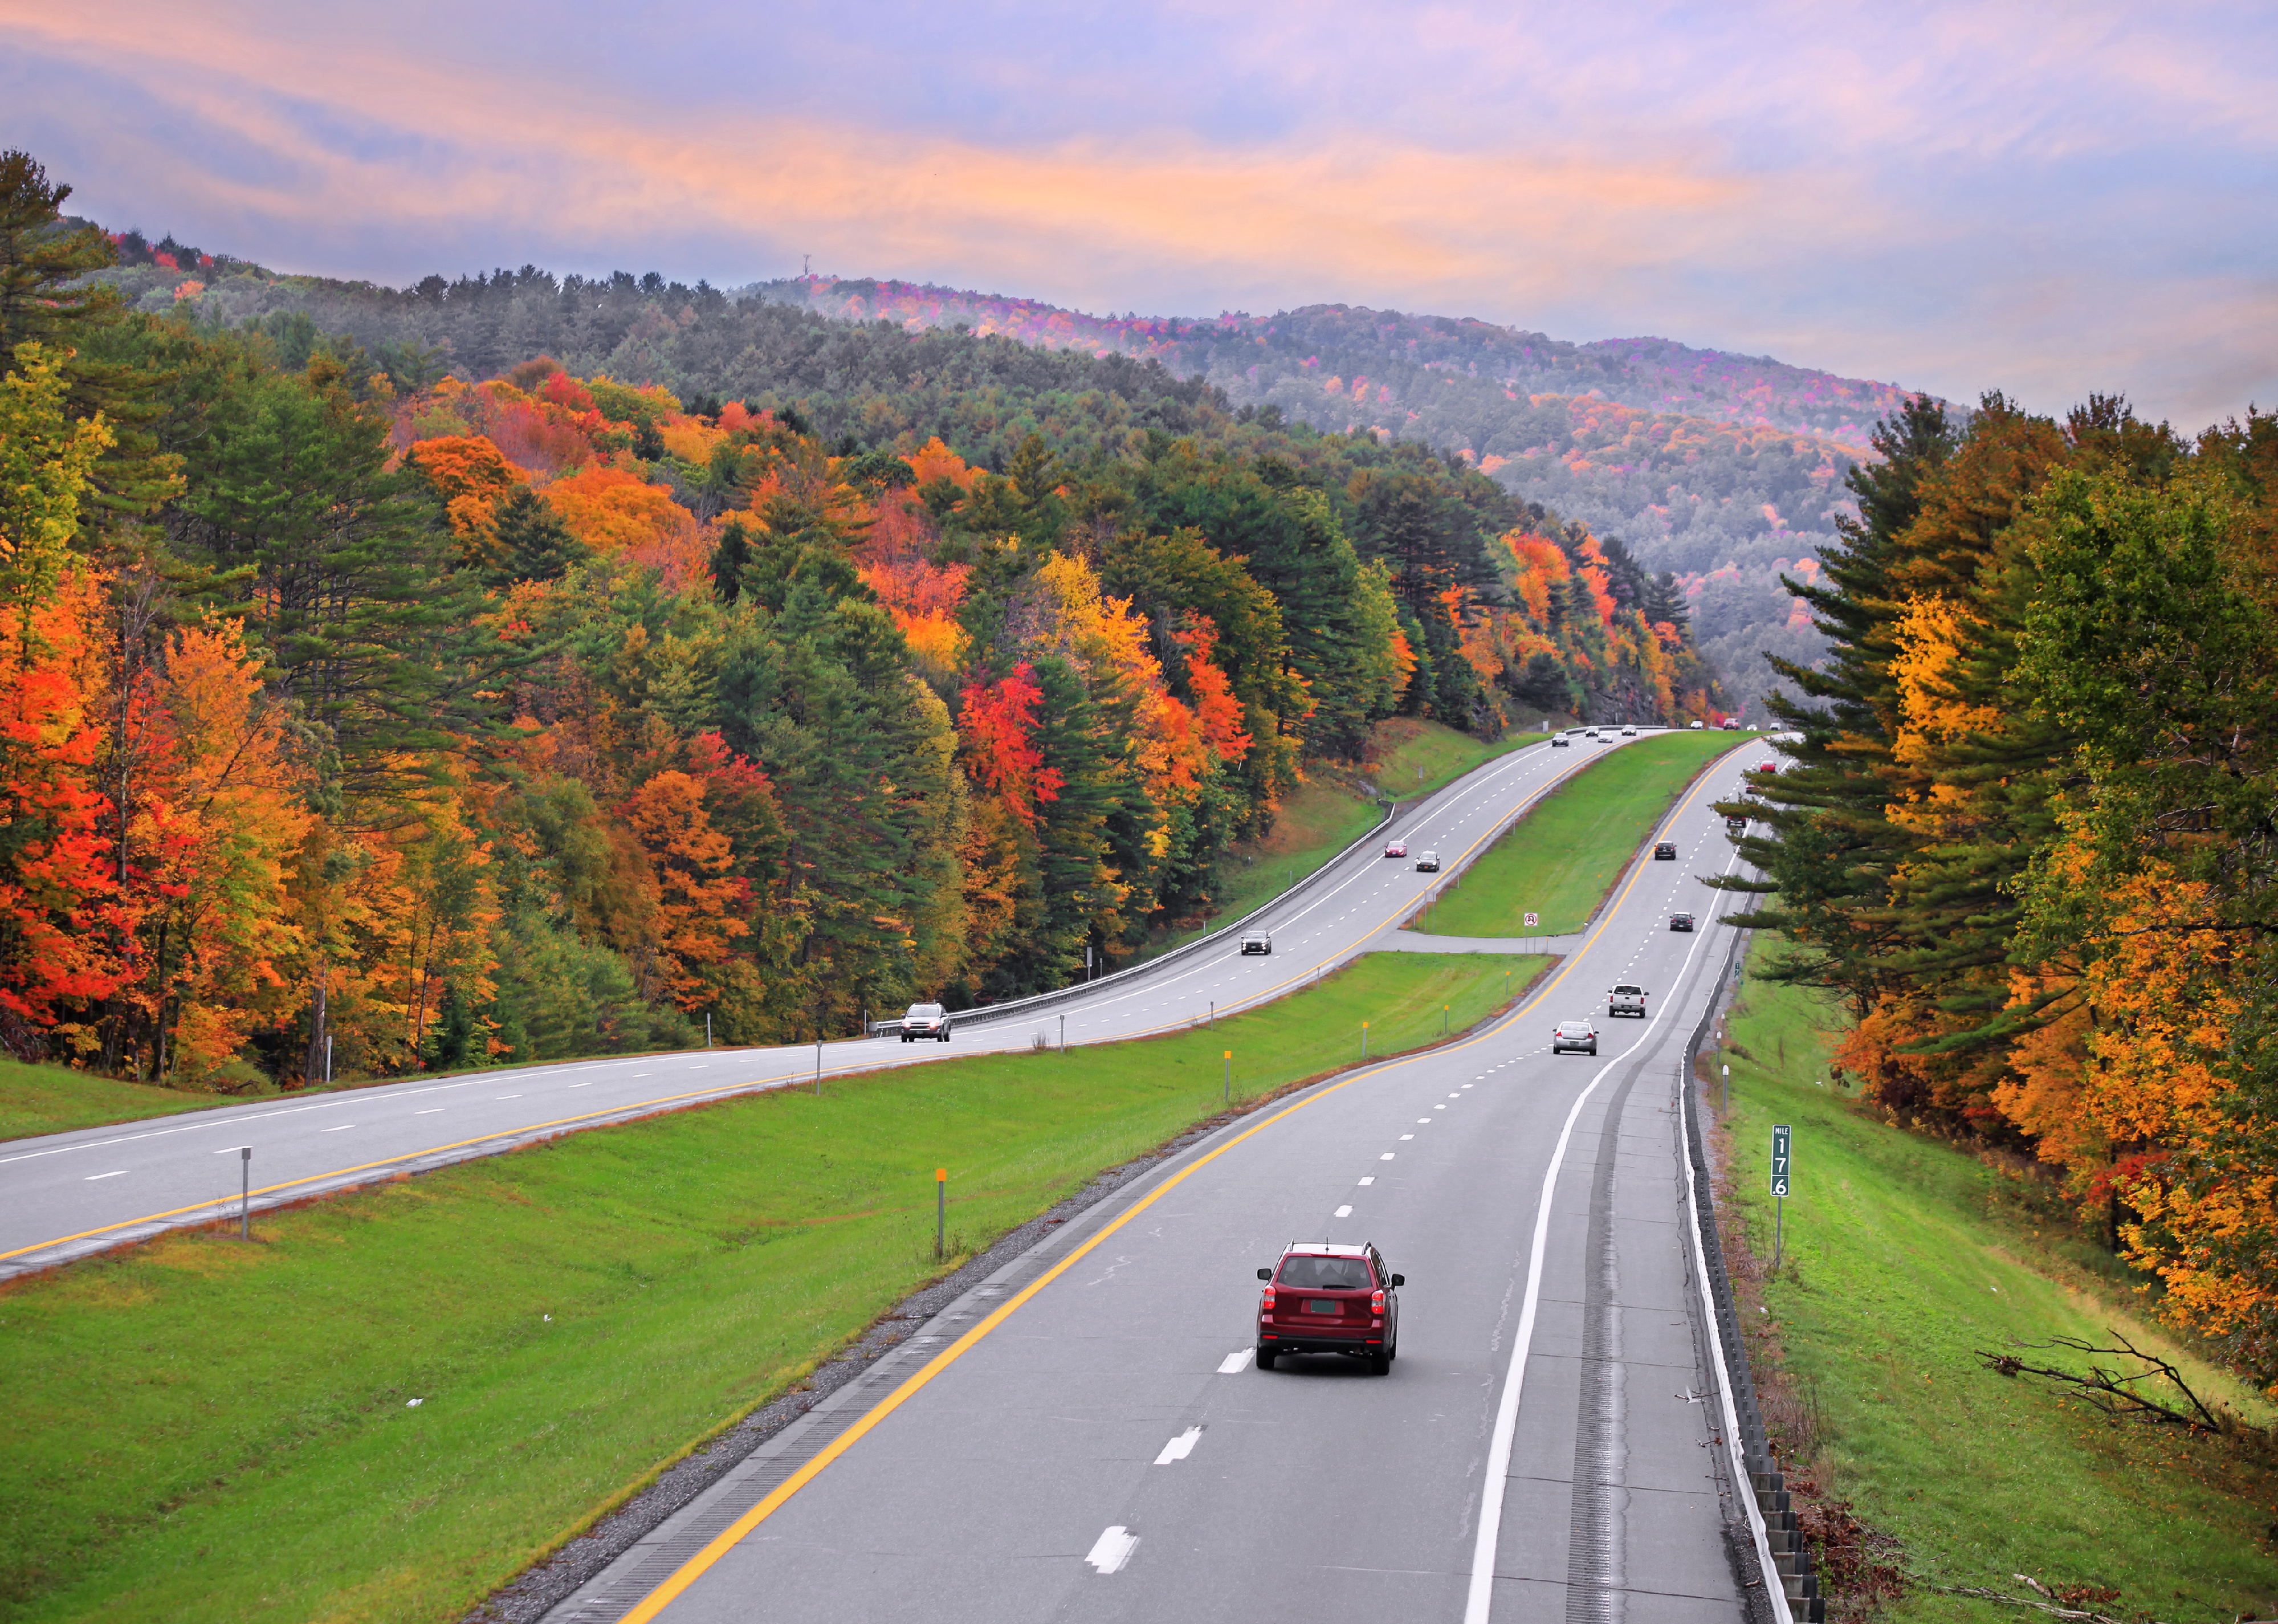 Scenic highway 89 in Vermont during autumn.